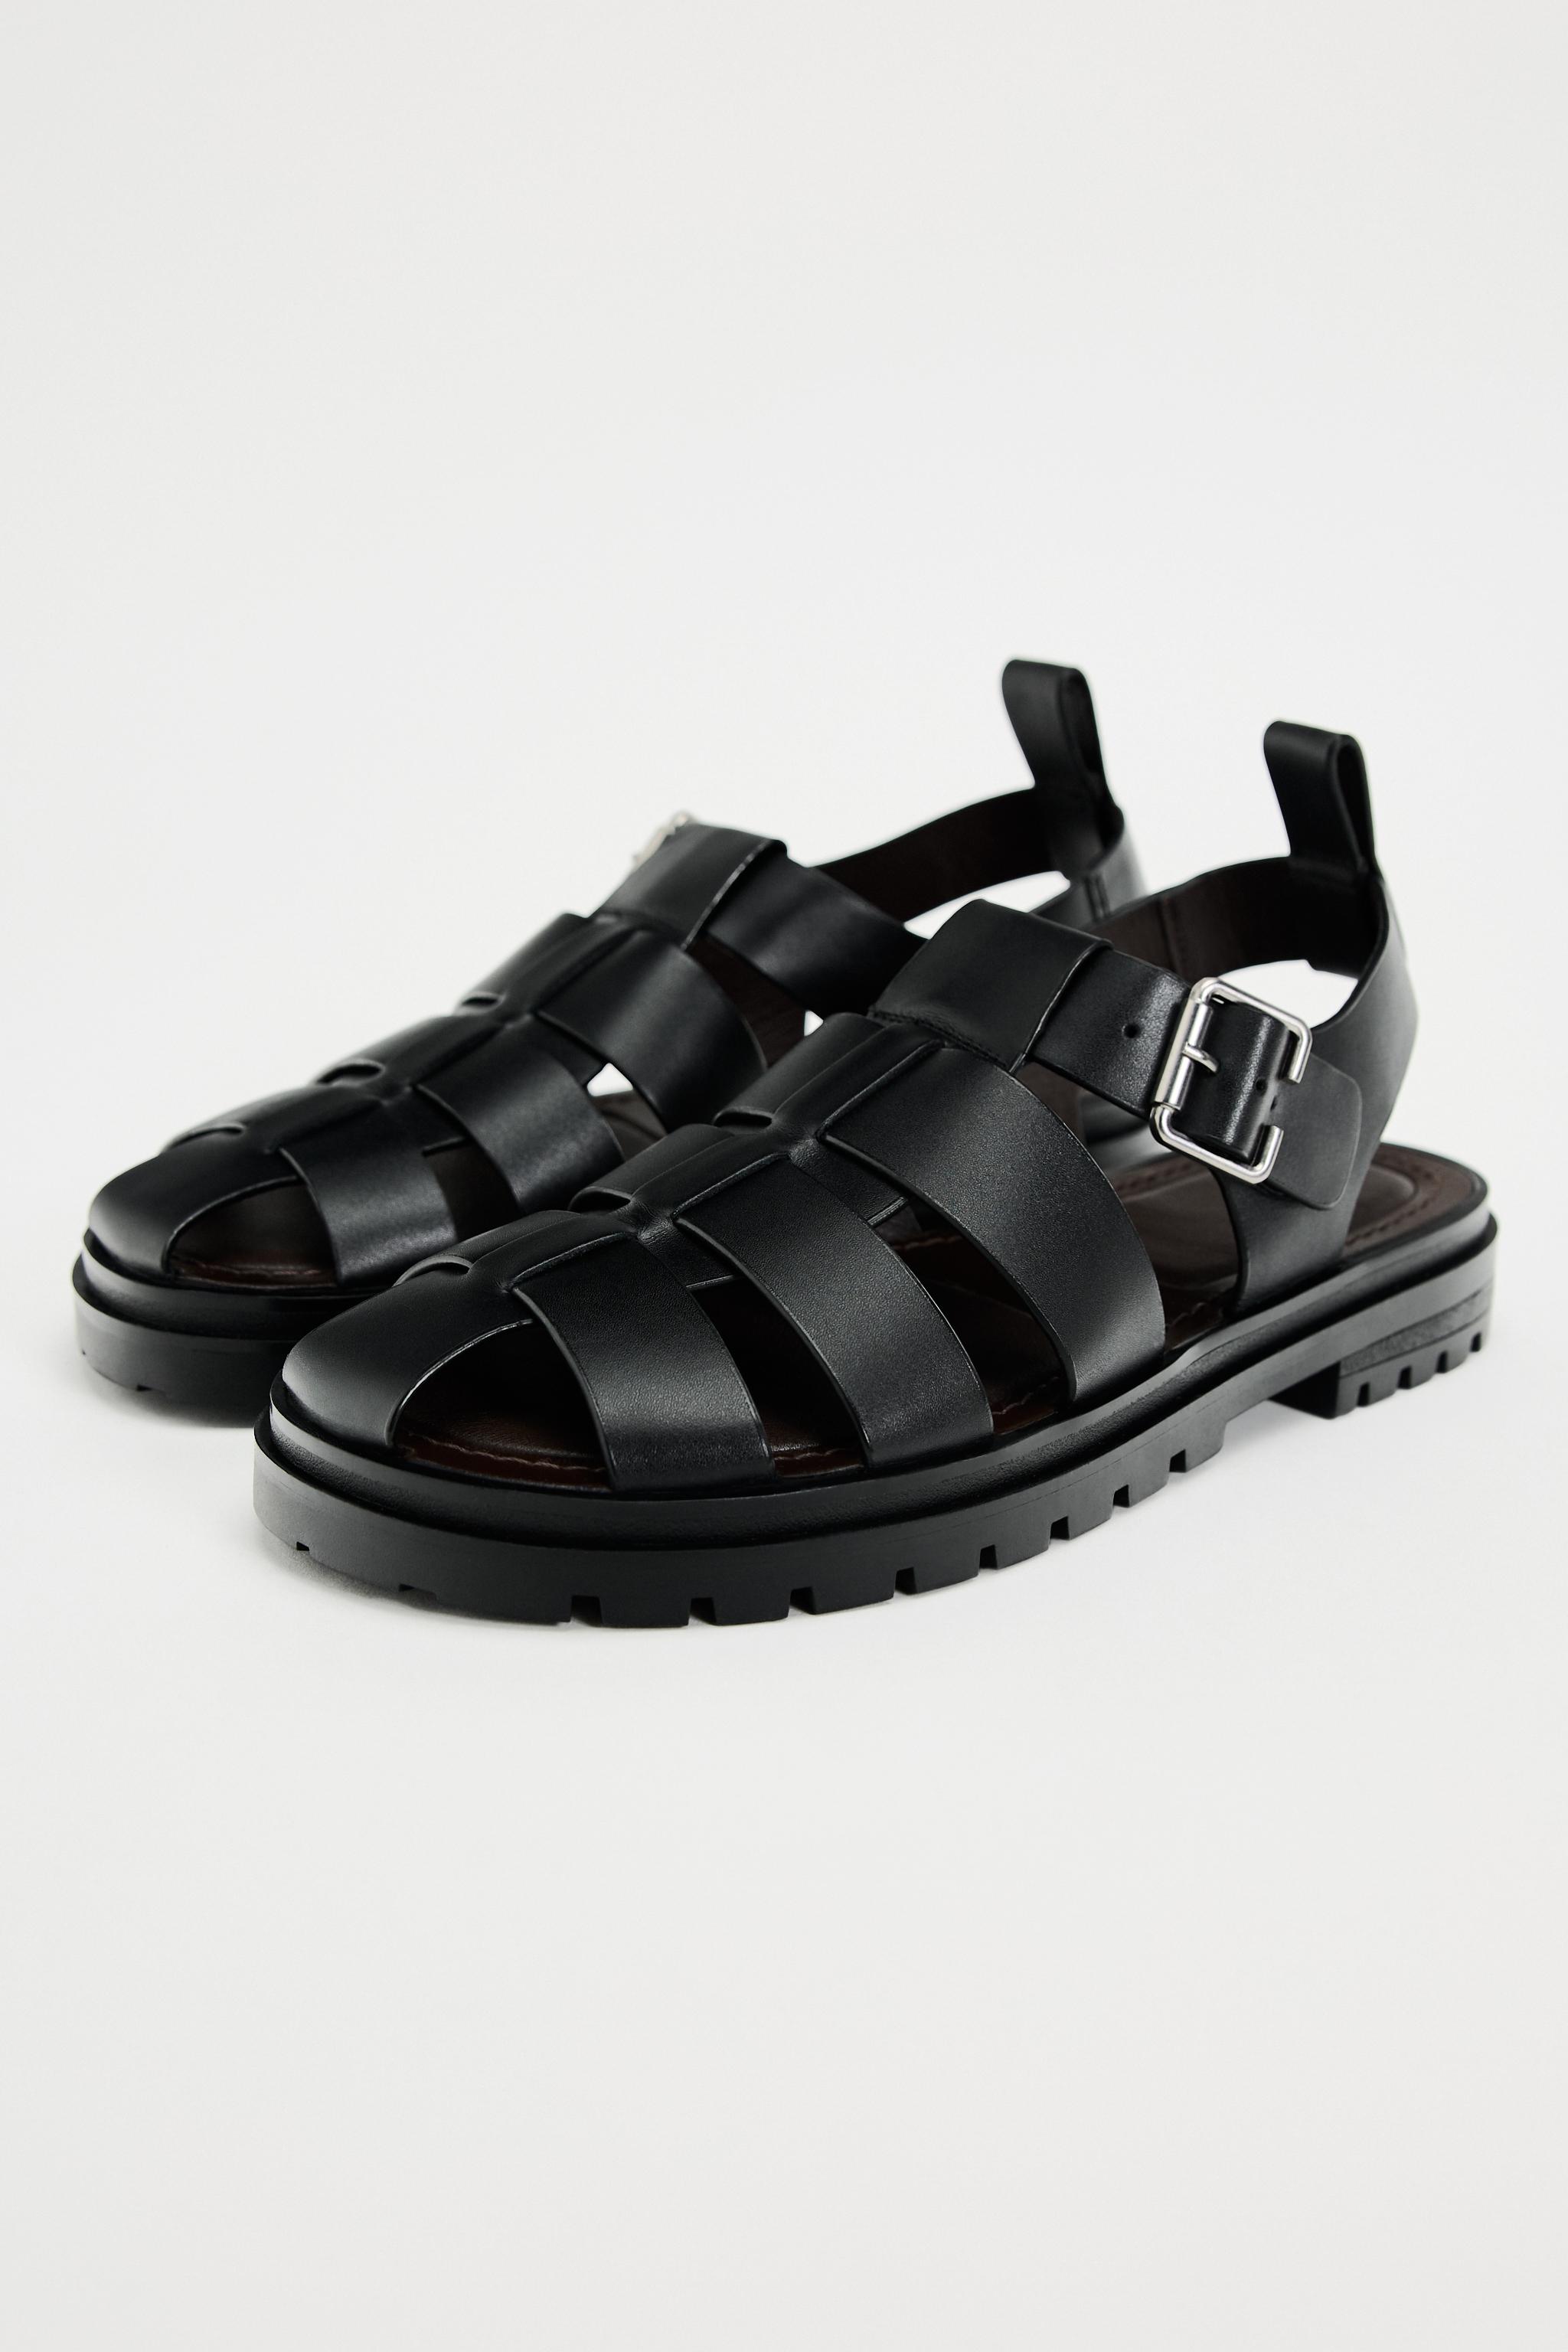 LUG SOLE LEATHER CAGE SANDALS